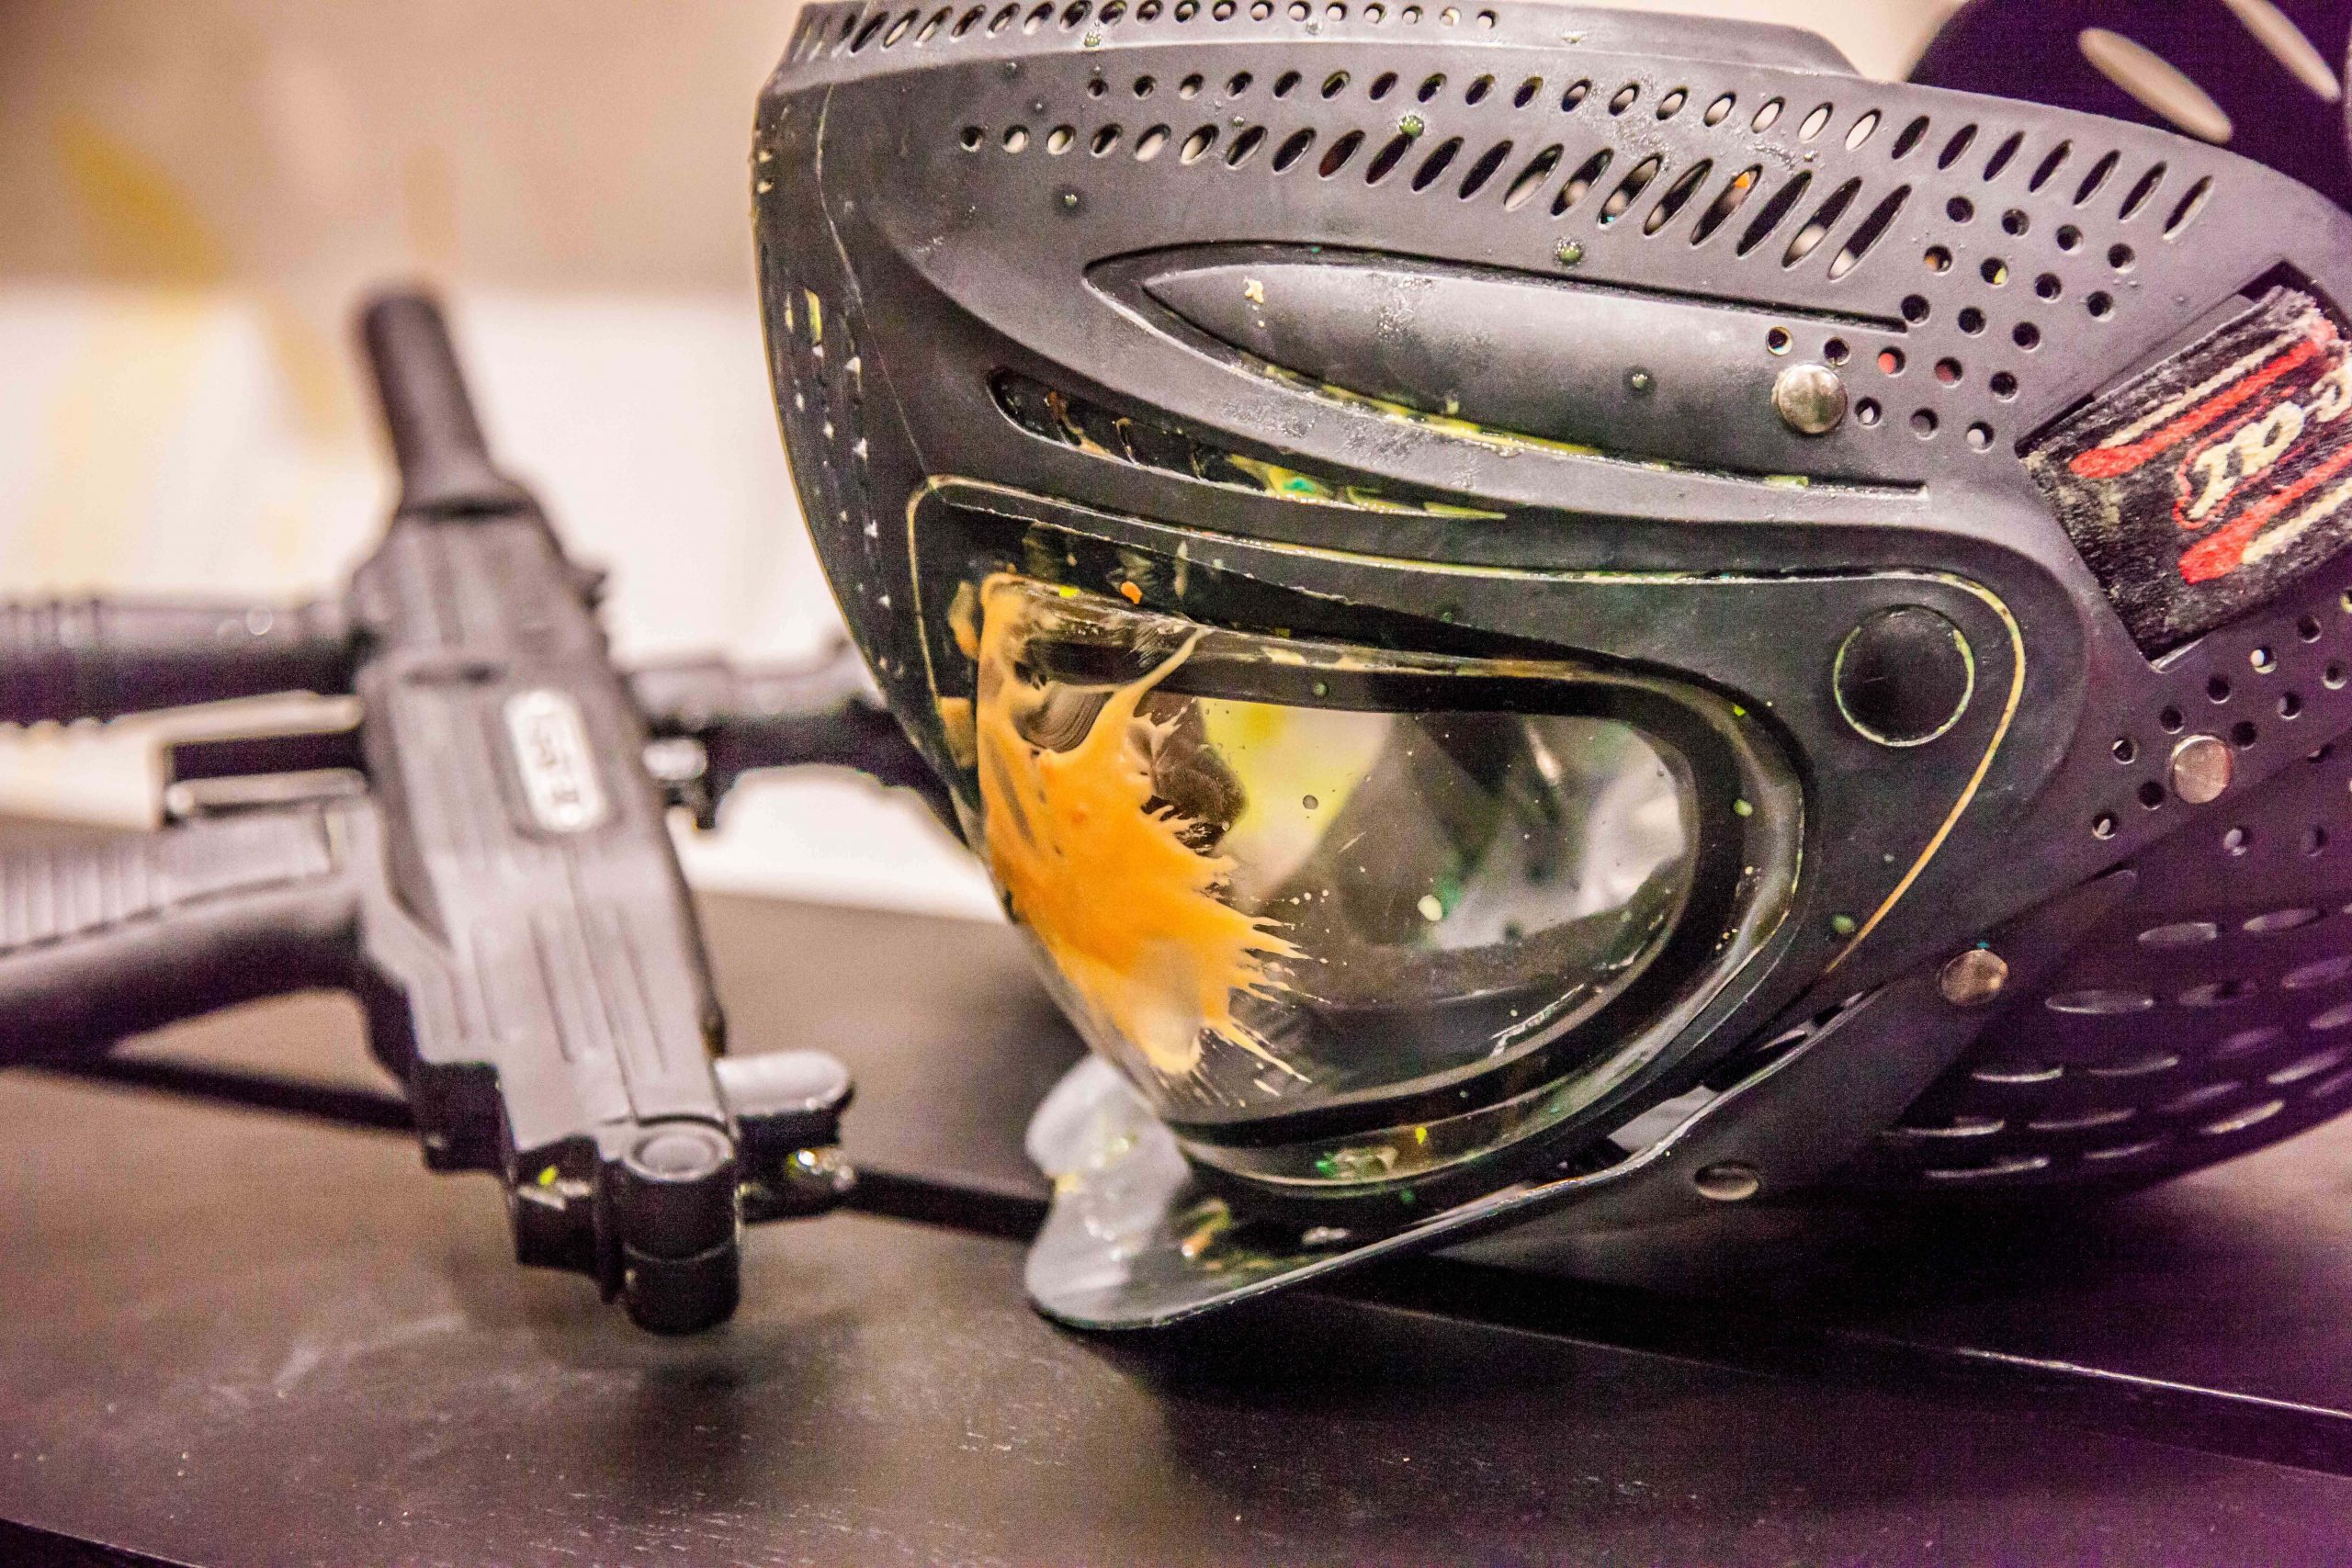 Helmet and guns used for paintball